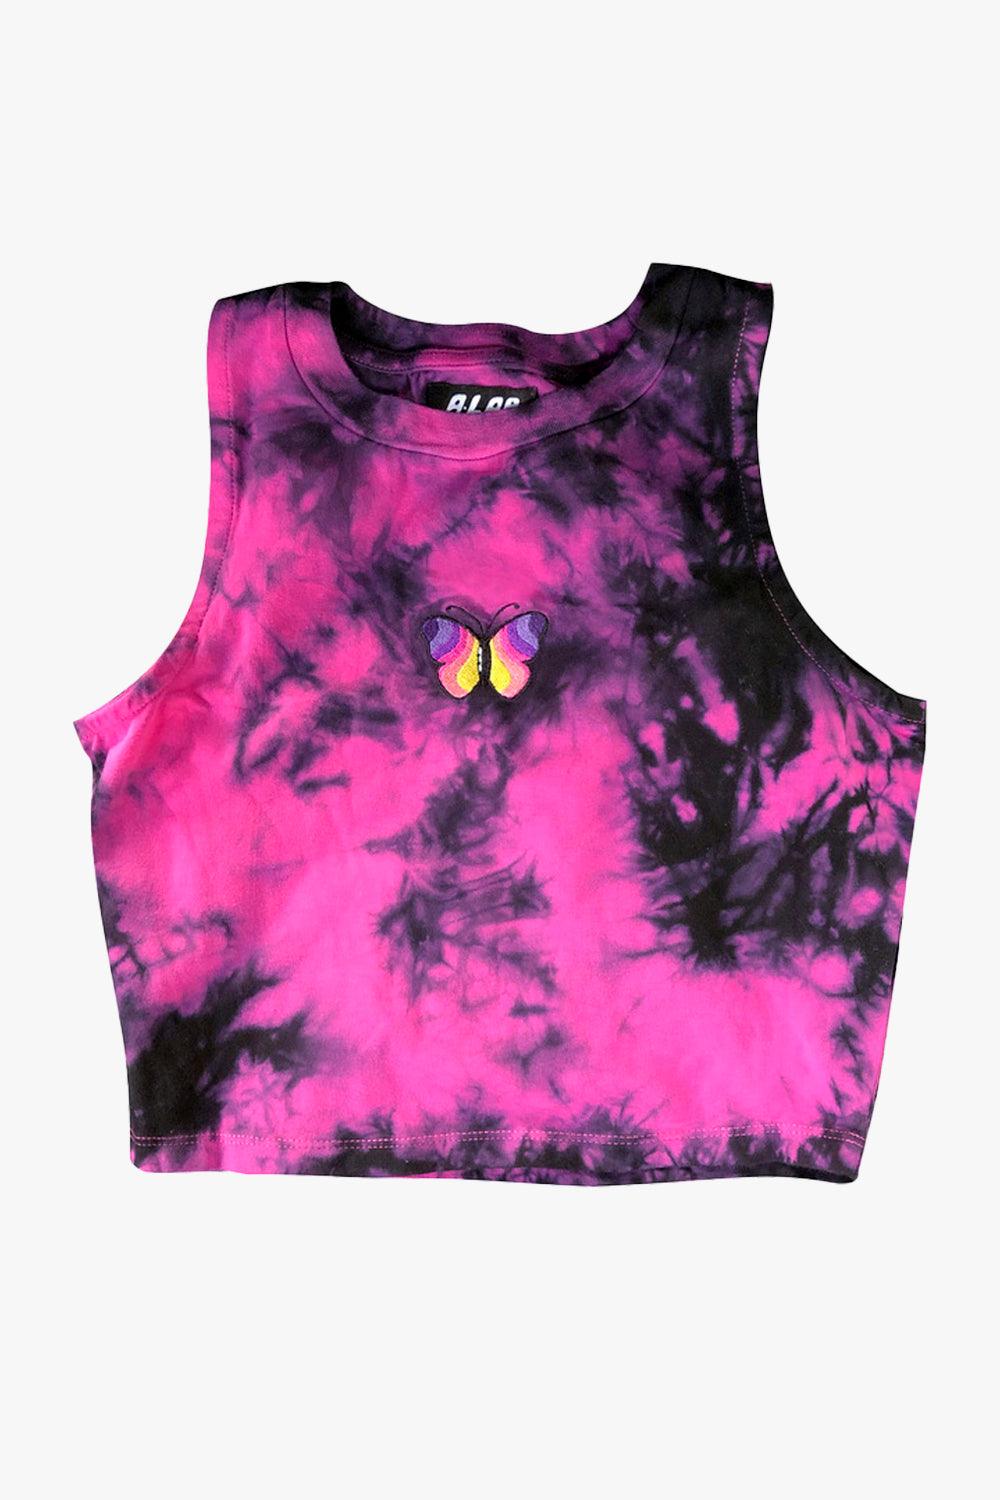 Butterfly Pink Acid Tie Dye Tank Top - Aesthetic Clothes Shop